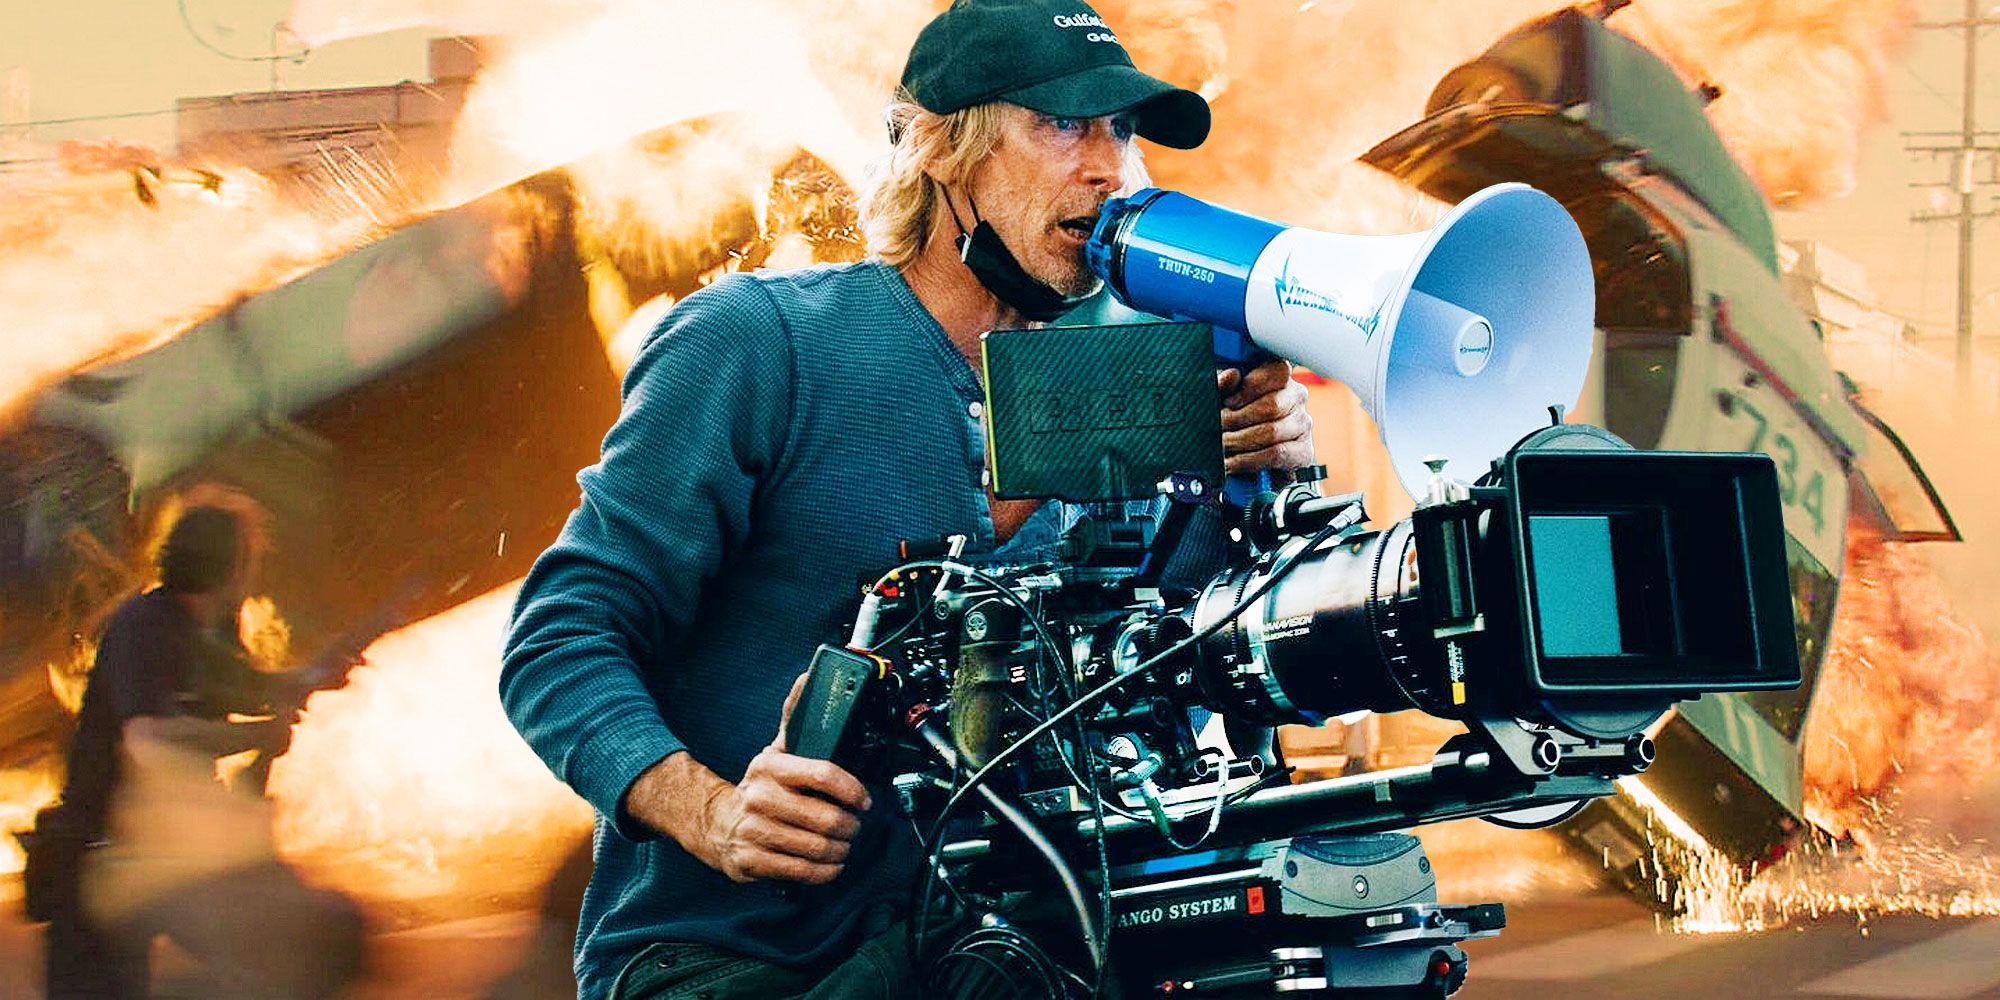 Michael Bay behind a camera over a picture of explosions